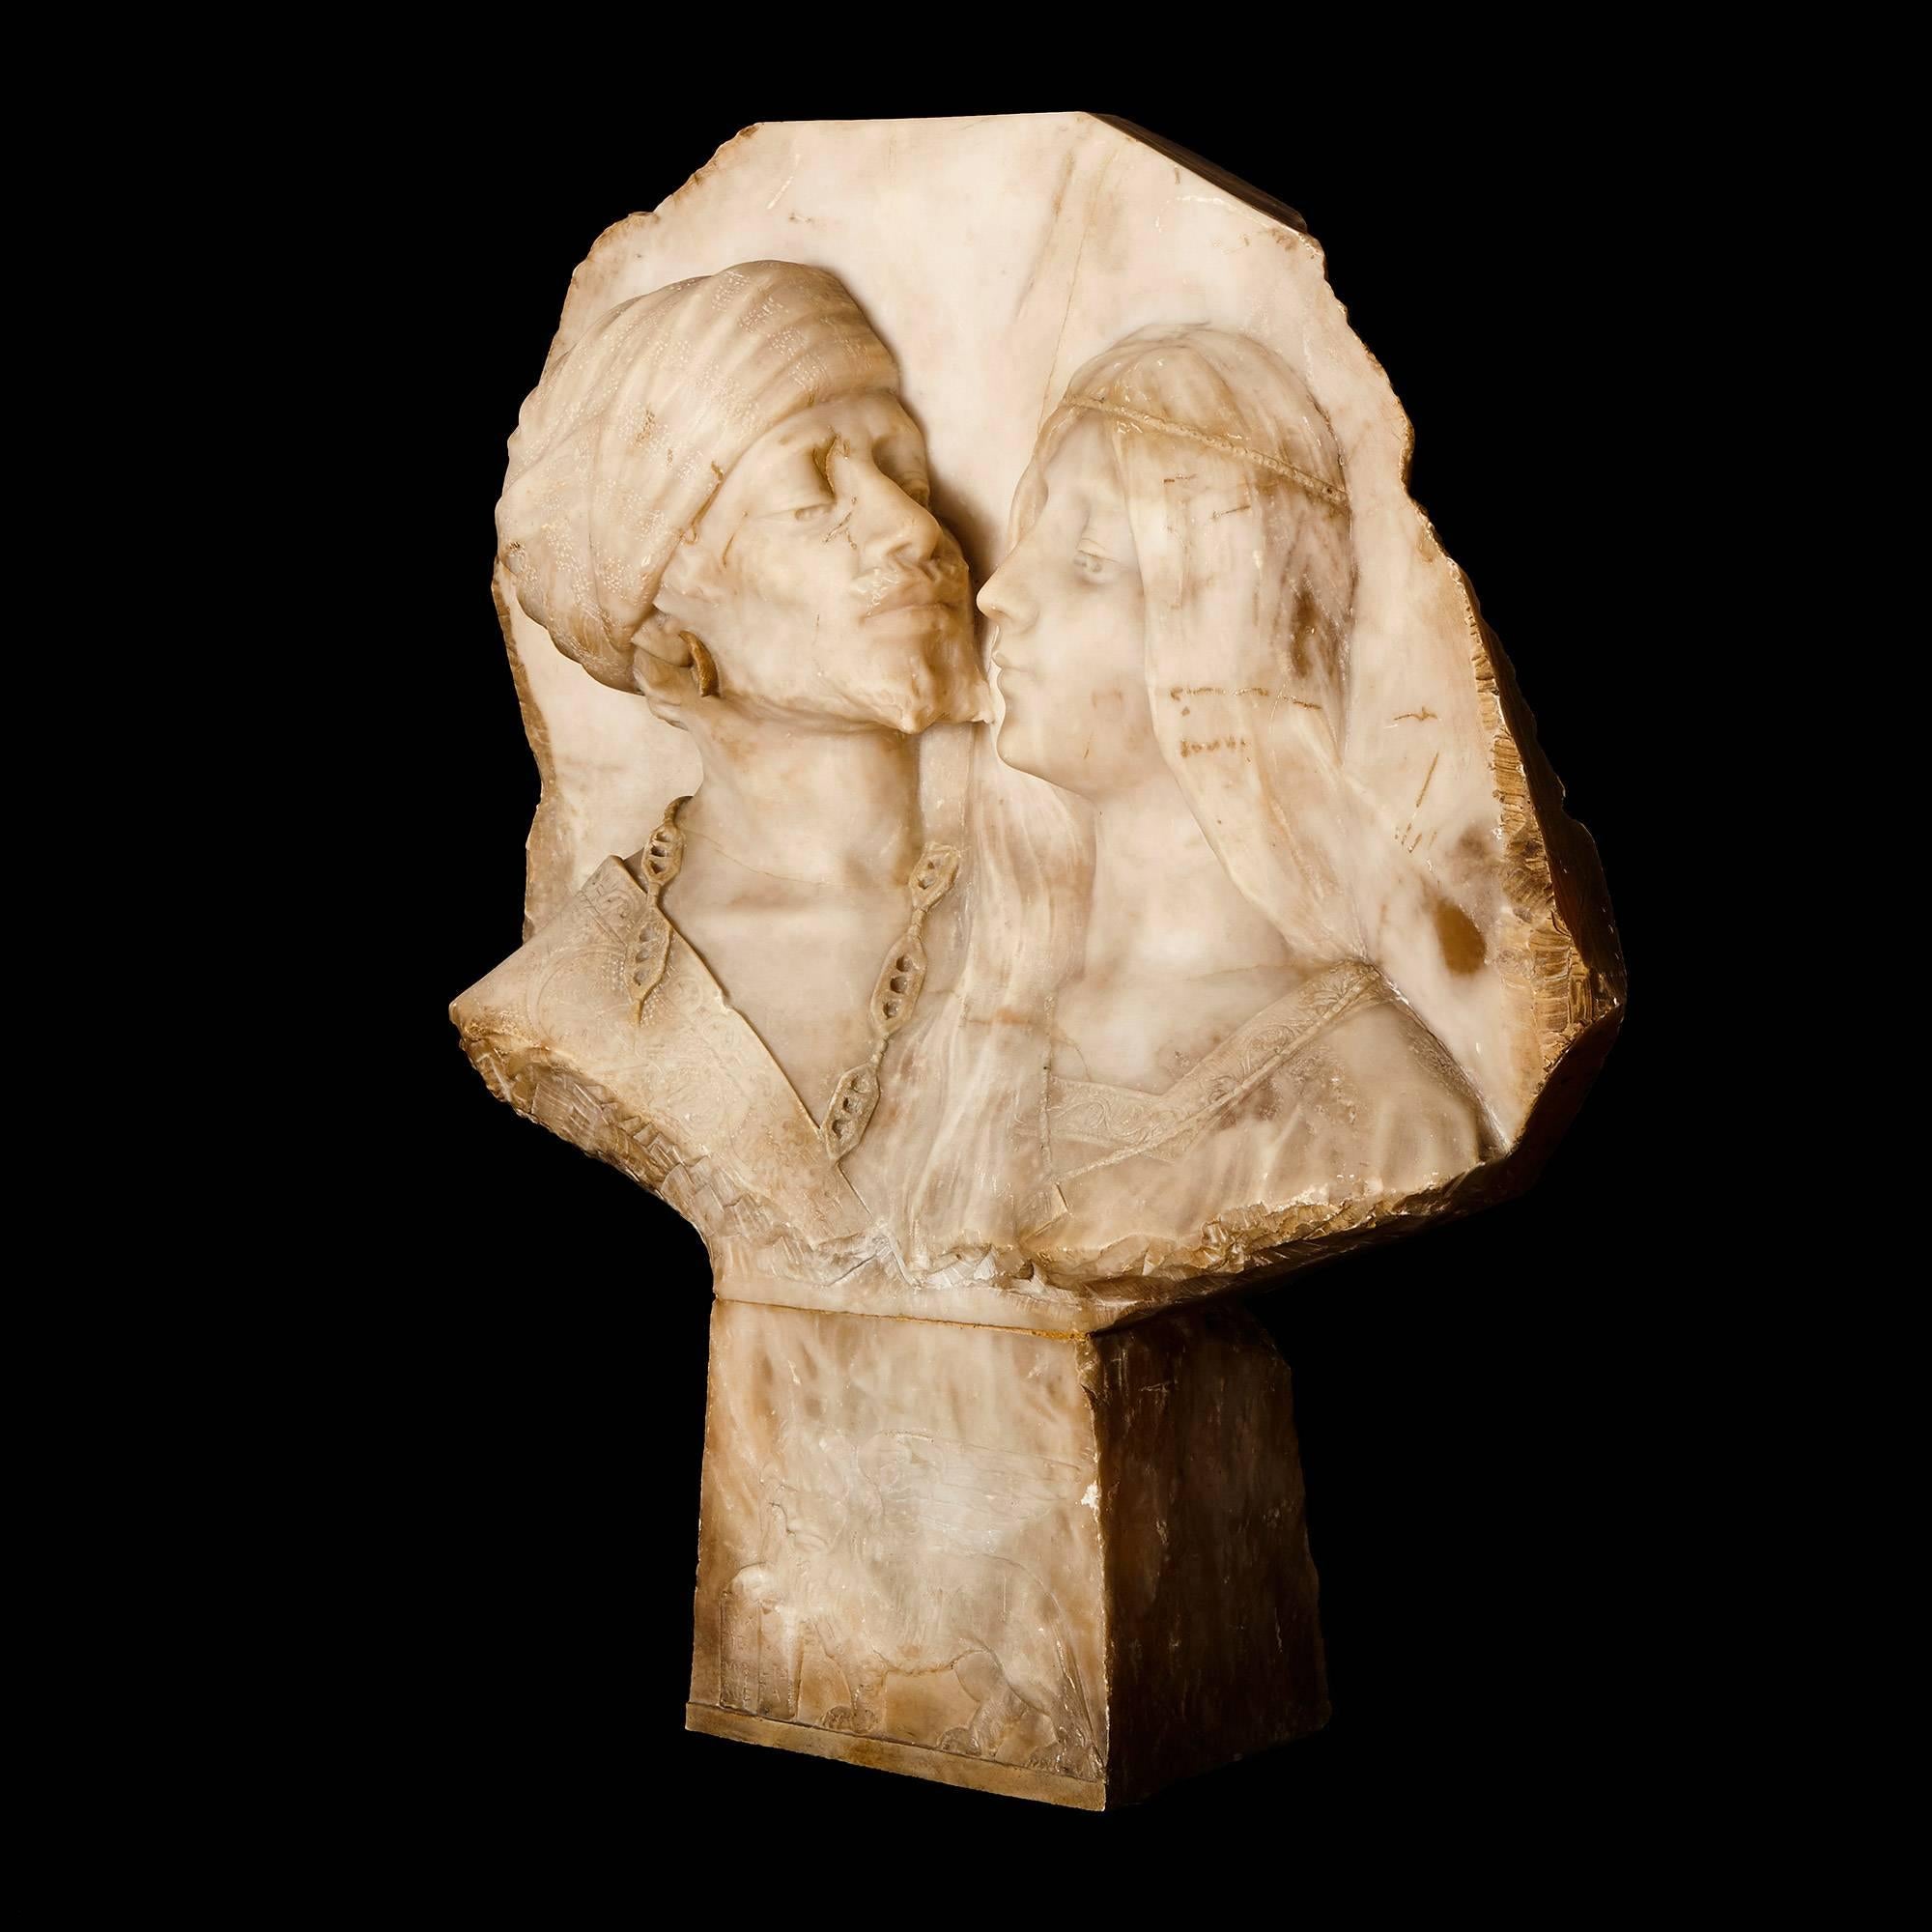 This charming antique panel is carved in the refined Orientalist style, and depicts a tender embrace between man and woman, capturing a moment of emotional intensity.

The panel portrays an Arabic male and female in typical dress facing towards